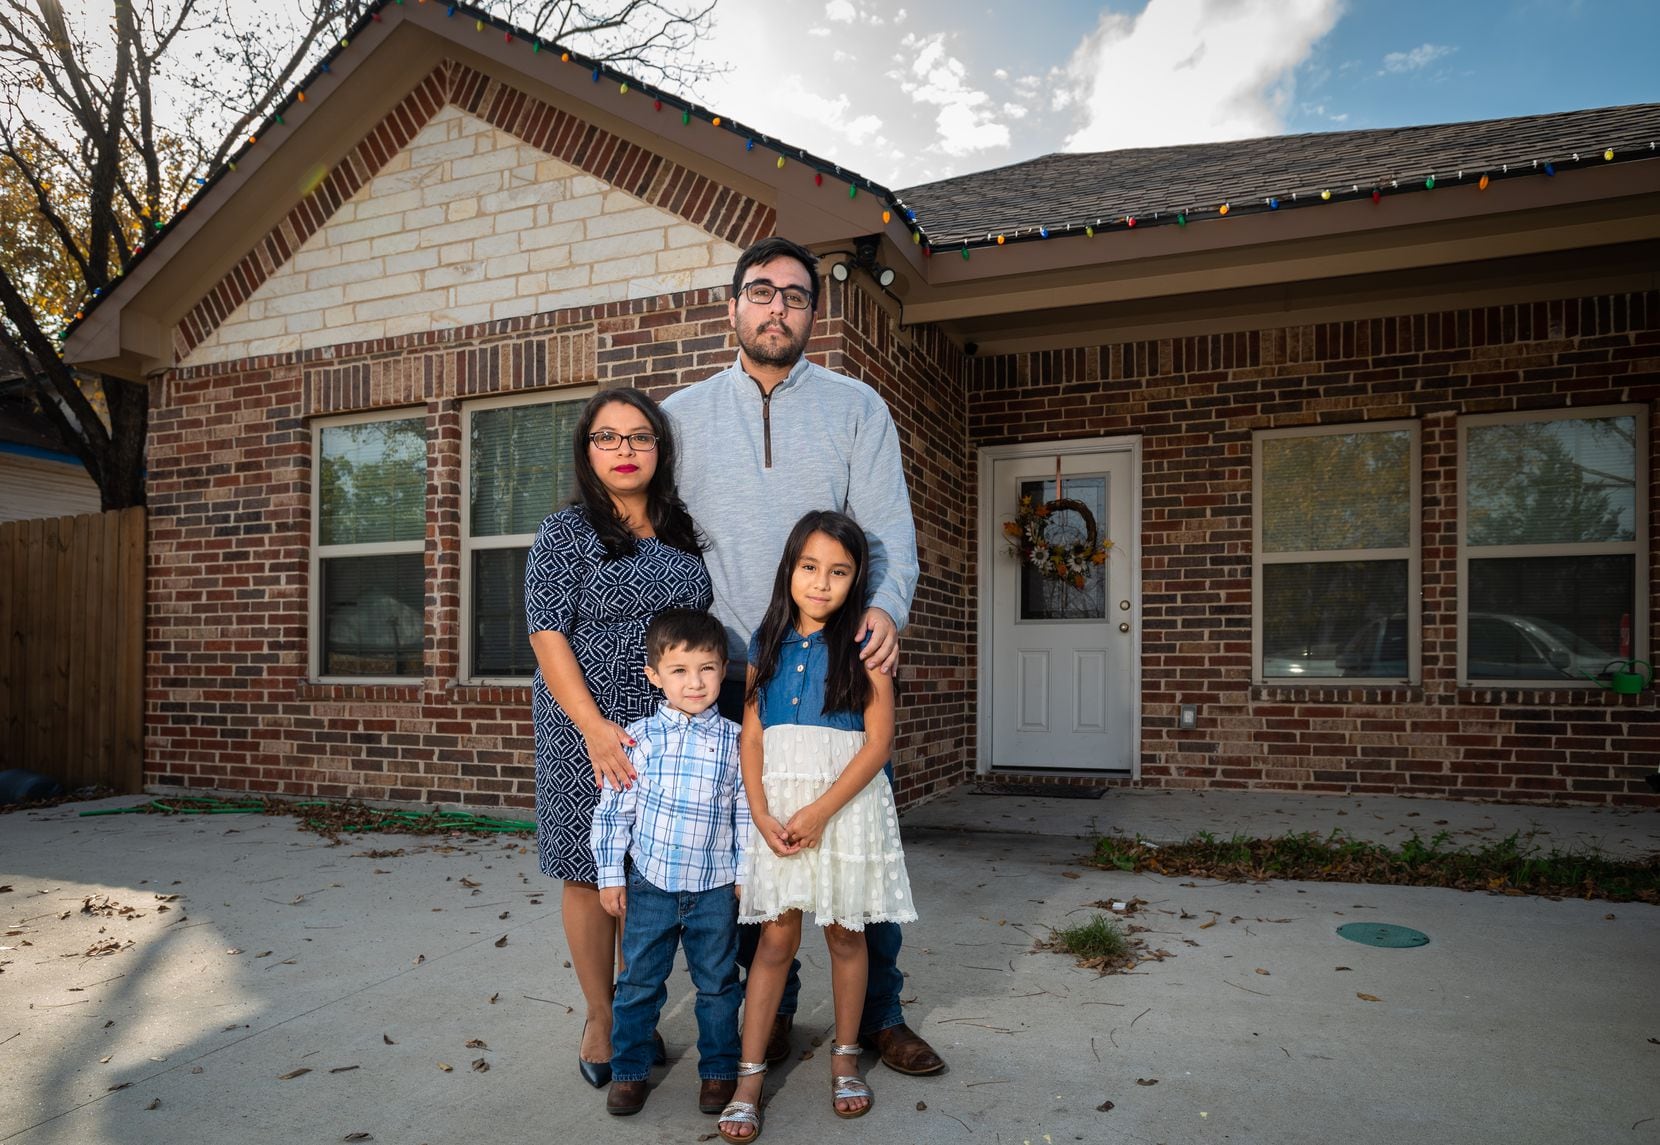 Laura Baez-Torres, who grew up in West Dallas, and husband Jake with their children...